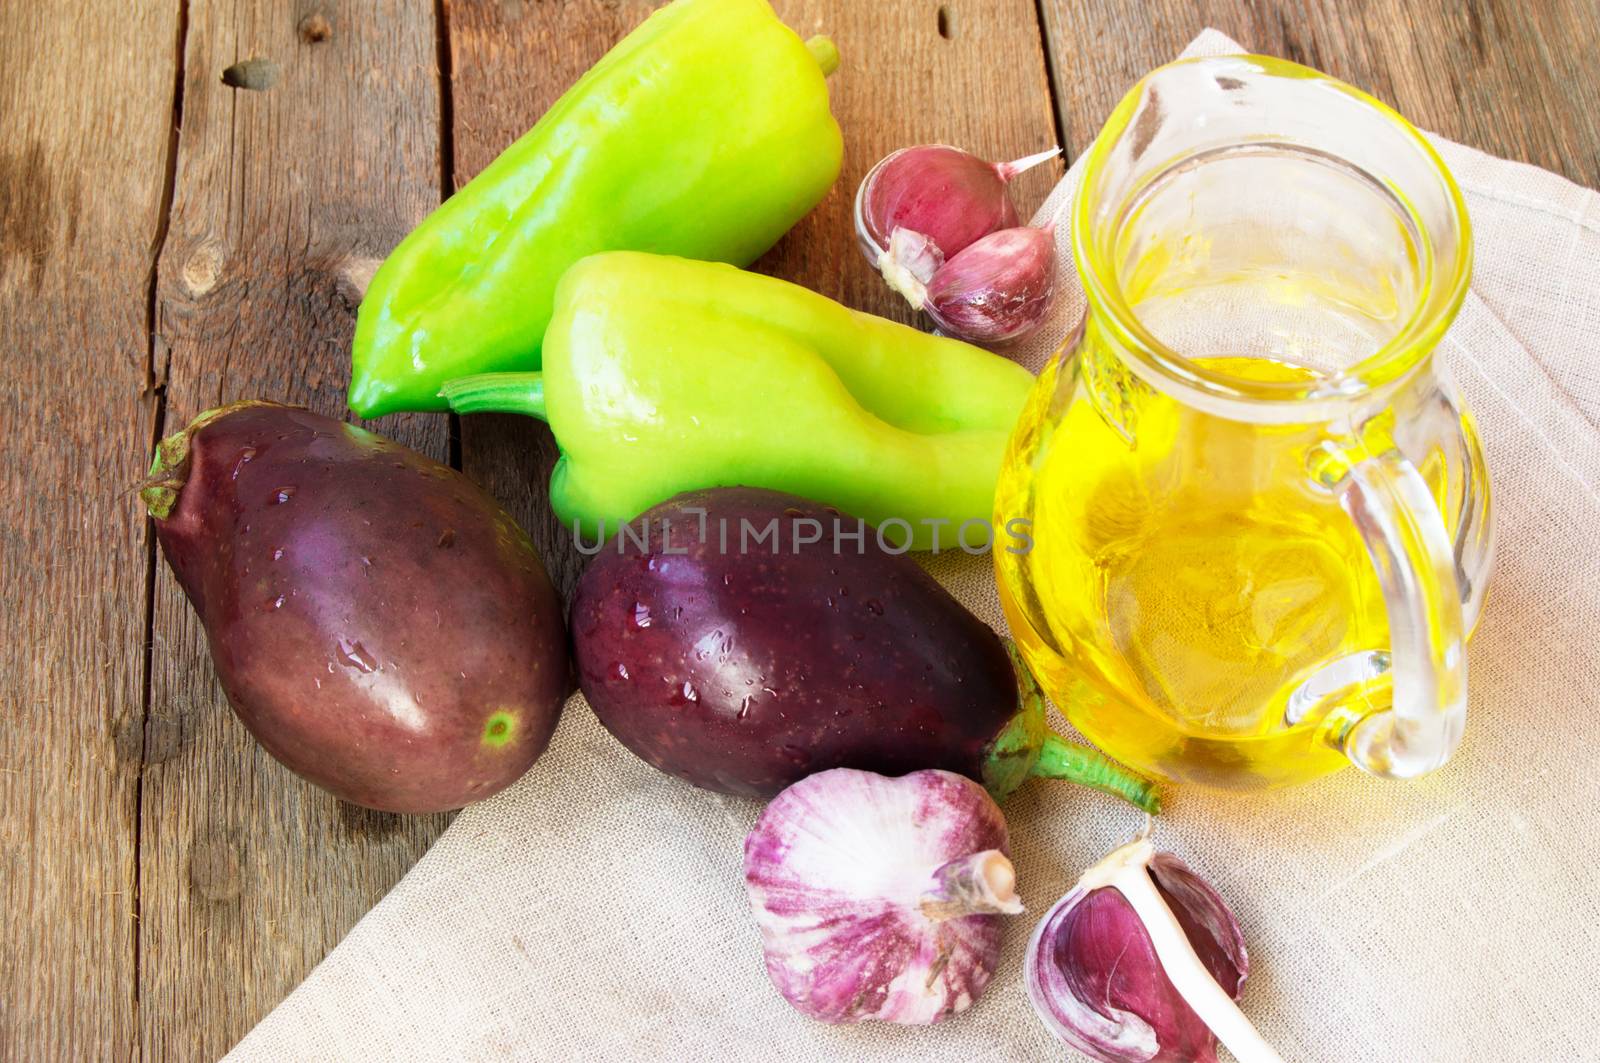 Raw eggplant, garlic, olive oil, sweet pepper, healthy eating and diet concept on the old wooden background.